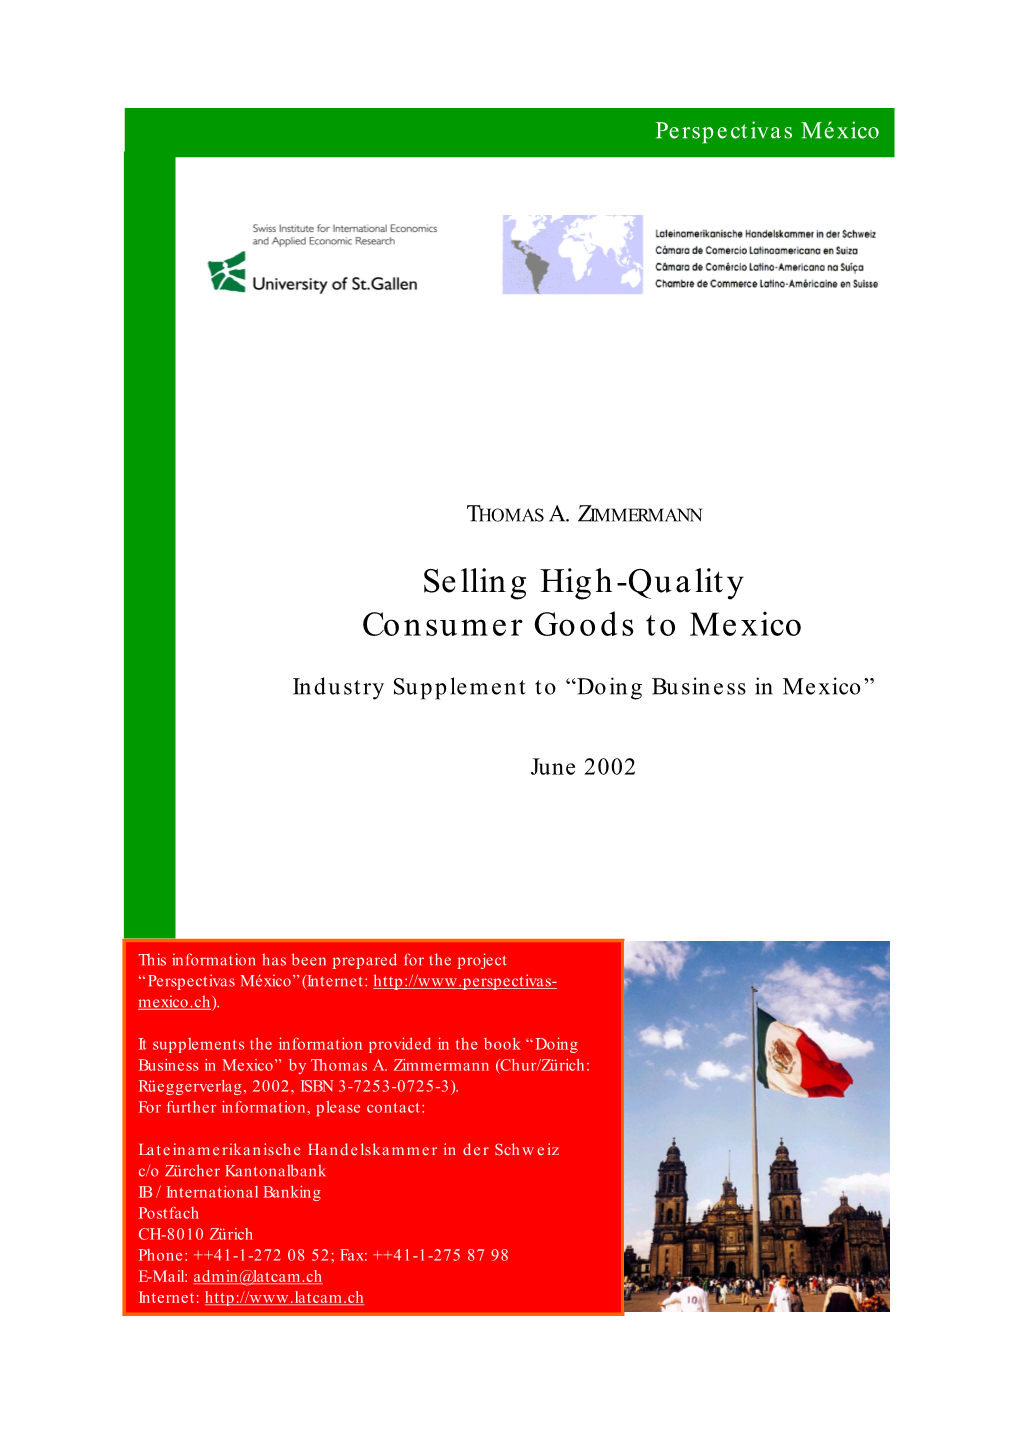 Selling High-Quality Consumer Goods to Mexico